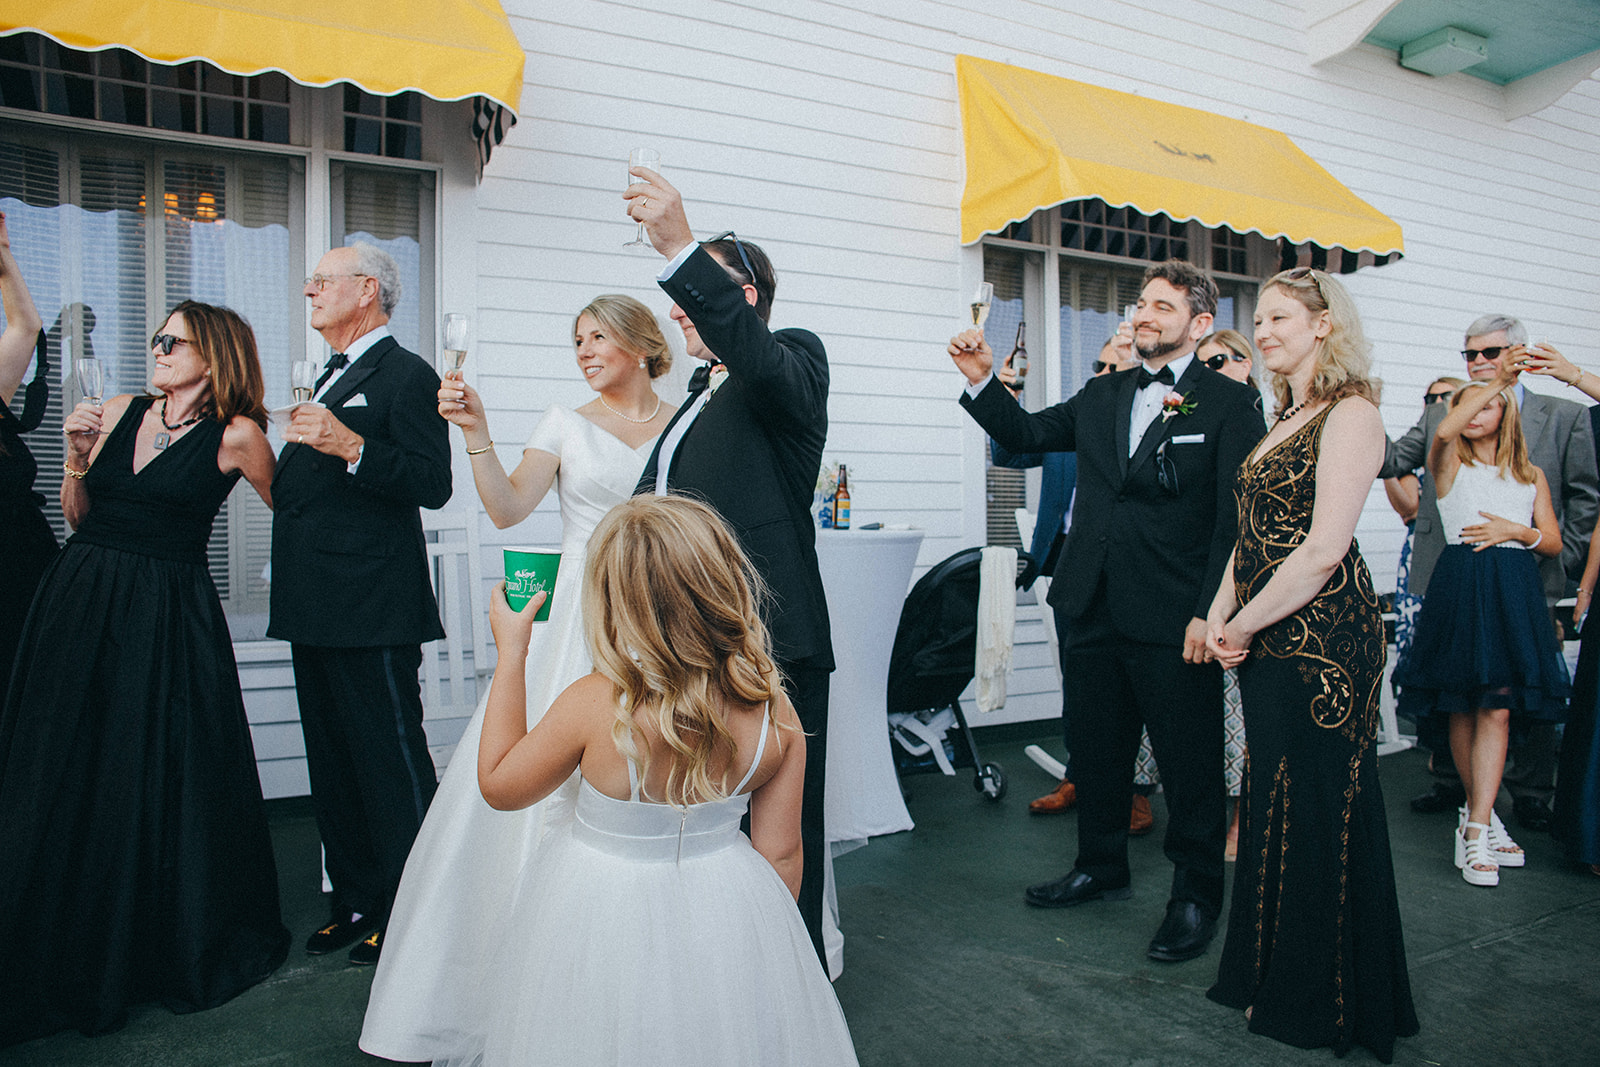 A fun and innocent moment of the flower girl toasting to the bride and groom on the Grand Hotel's largest front porch